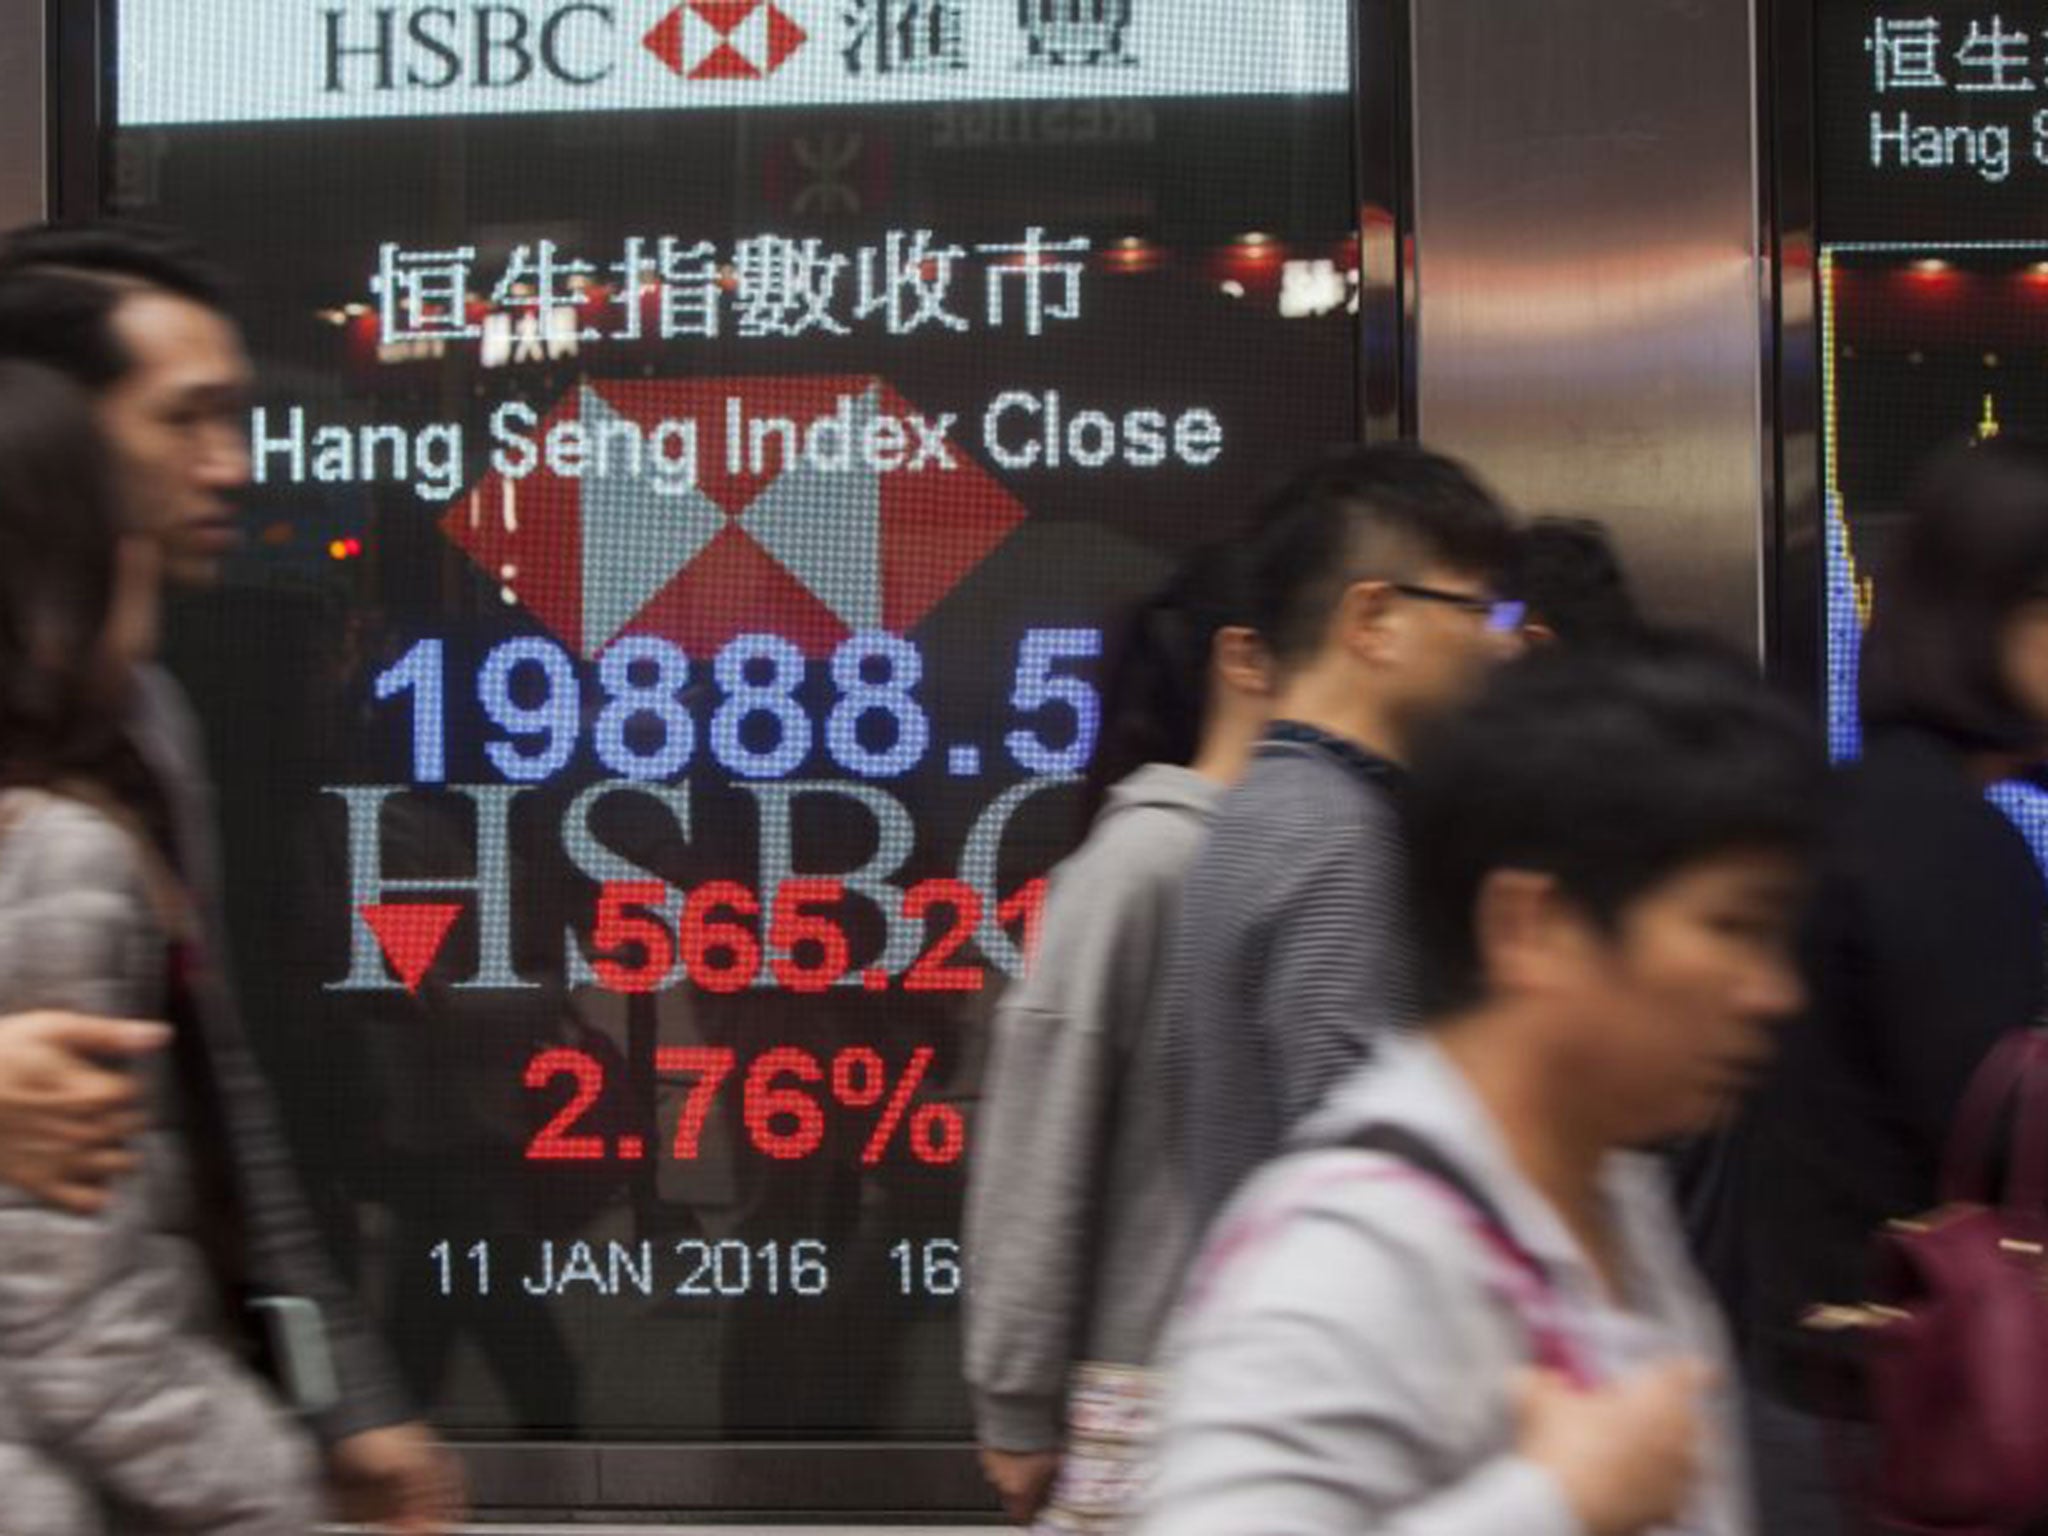 China's volatile Shanghai Composite dropped to intraday lows not seen since last August